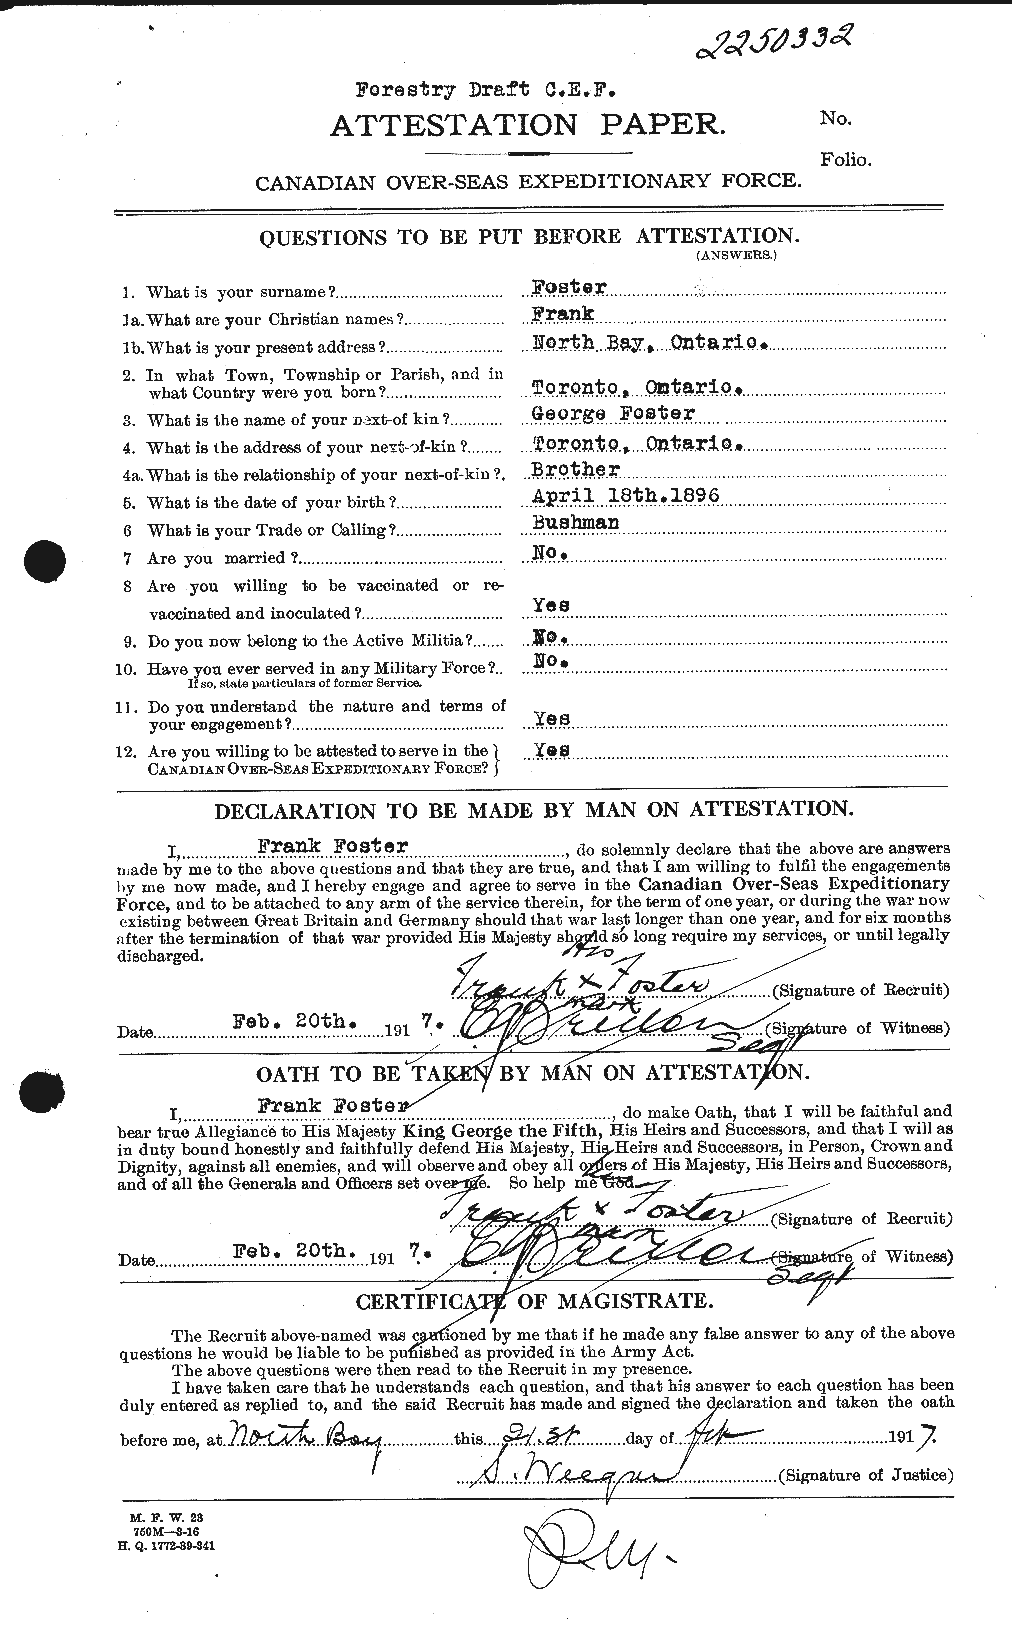 Personnel Records of the First World War - CEF 330618a